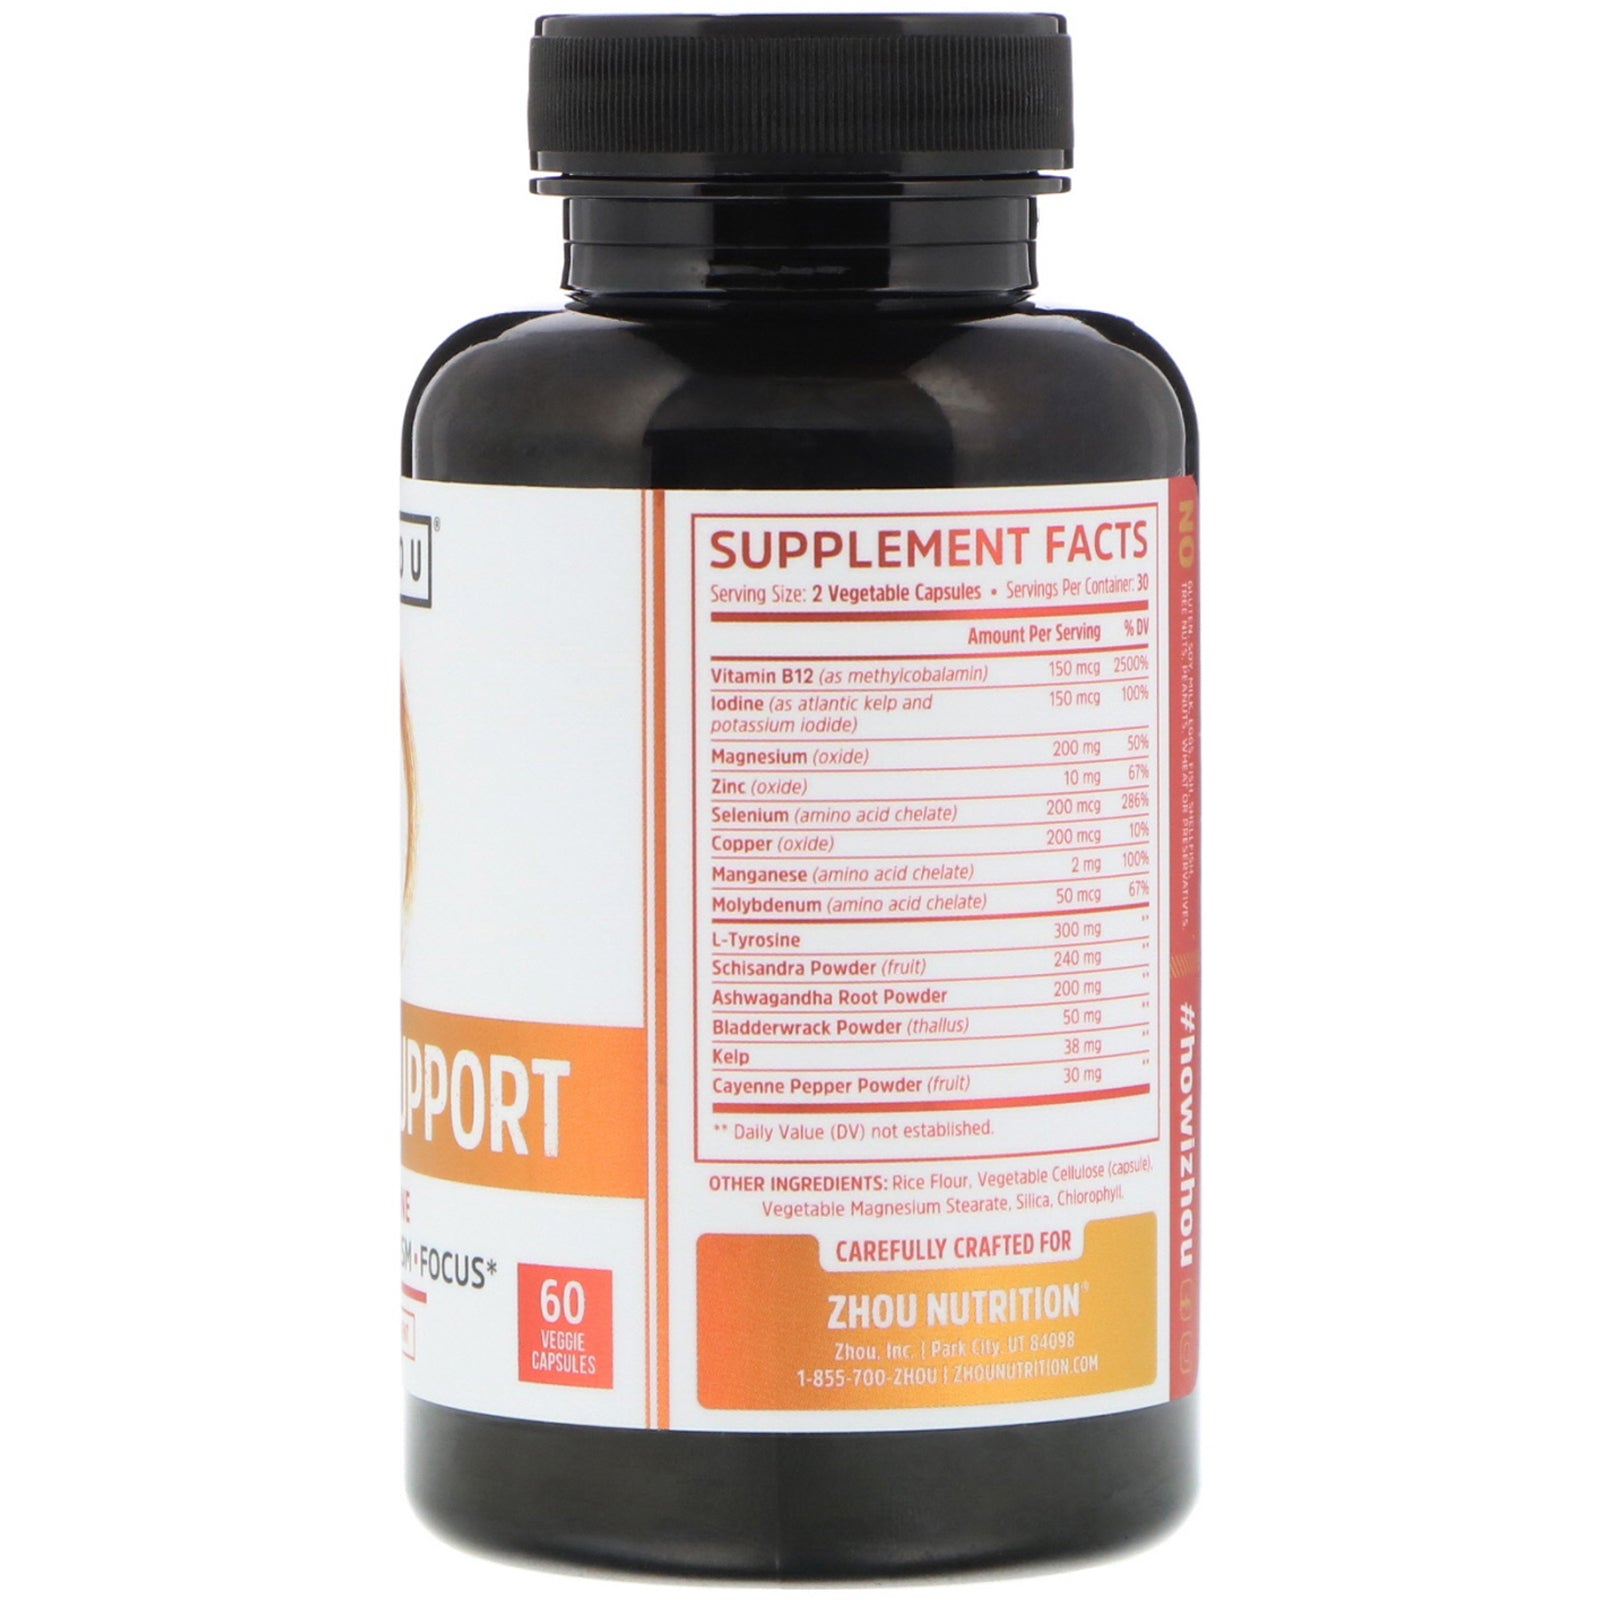 Zhou Nutrition, Thyroid Support with Iodine, 60 Veggie Capsules